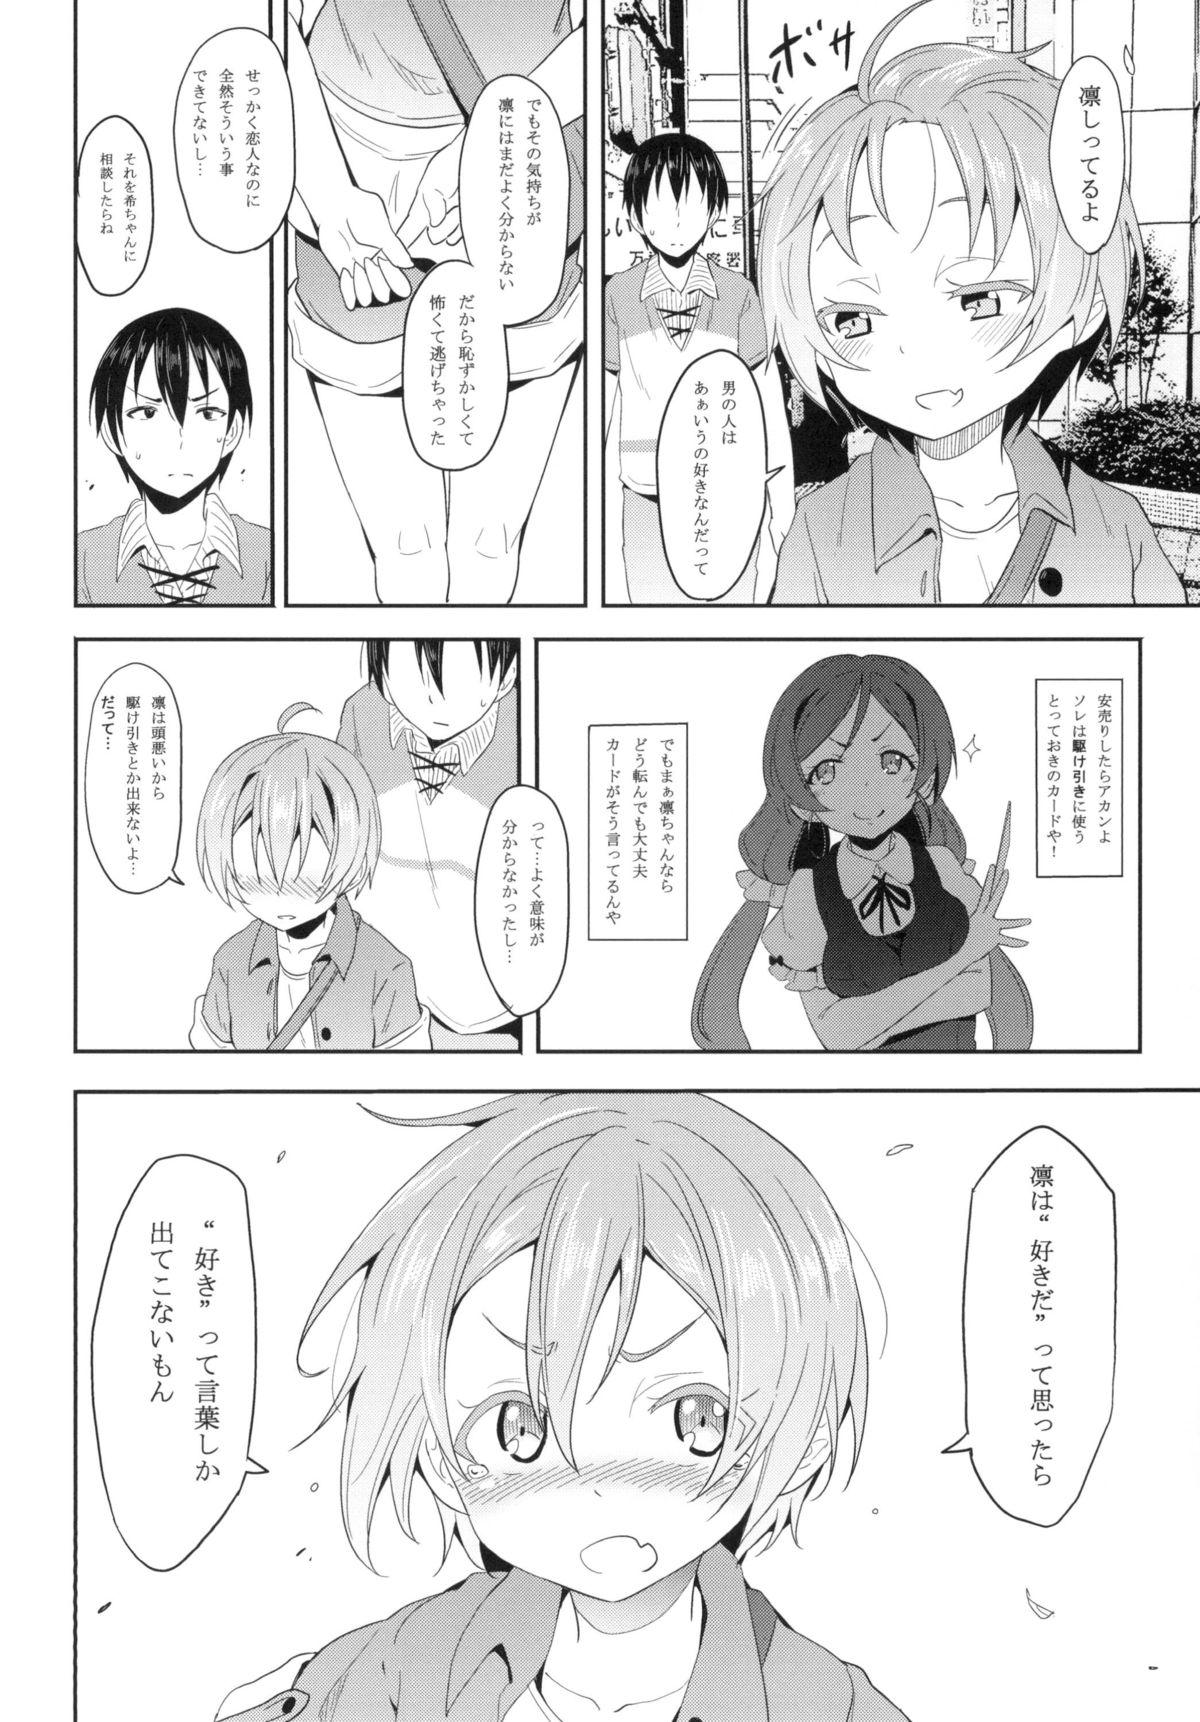 Toilet Rin-chan to Issho. - Love live Creampies - Page 6